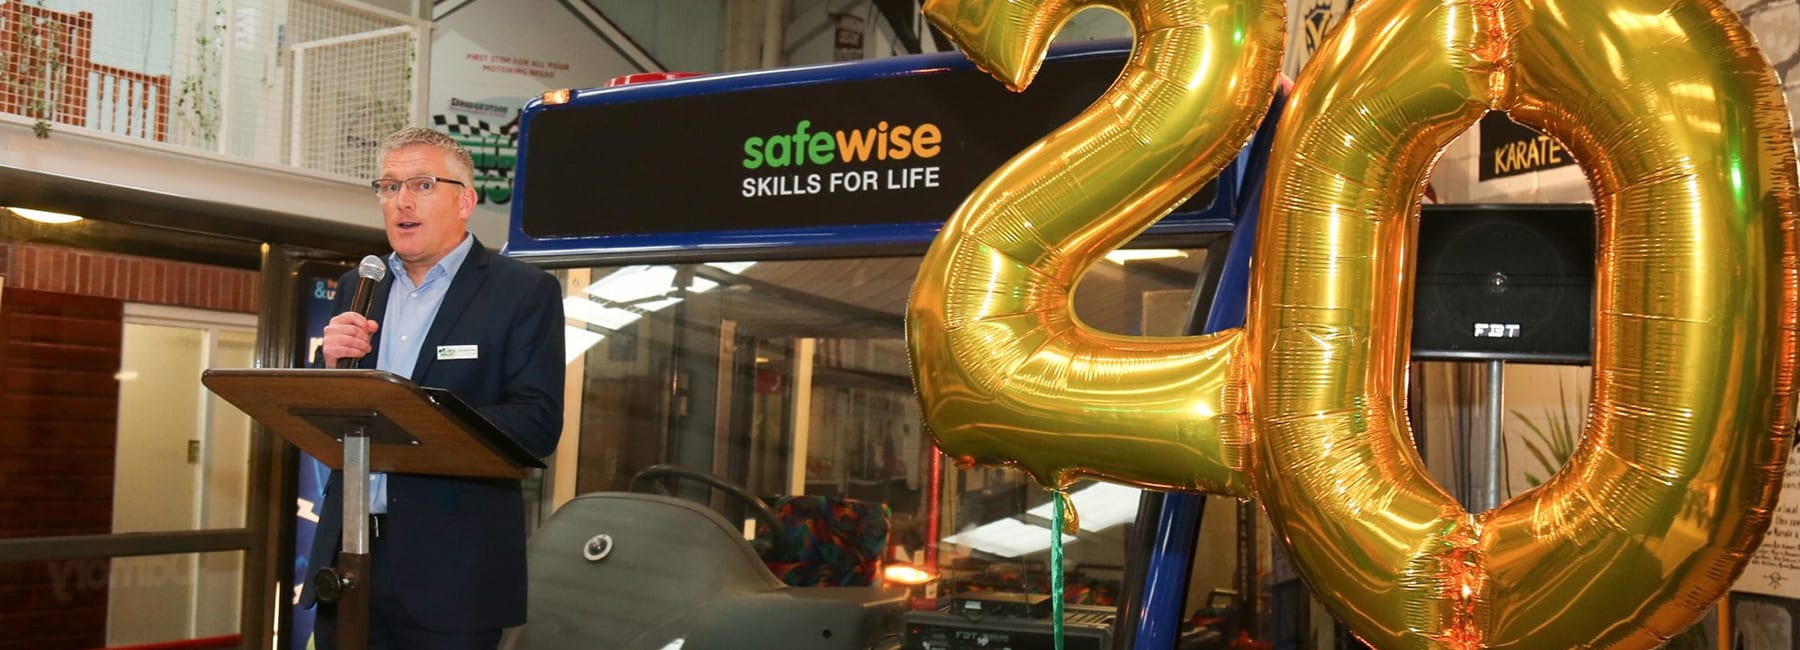 Digital Storm attends Safewise 20th Anniversary celebrations